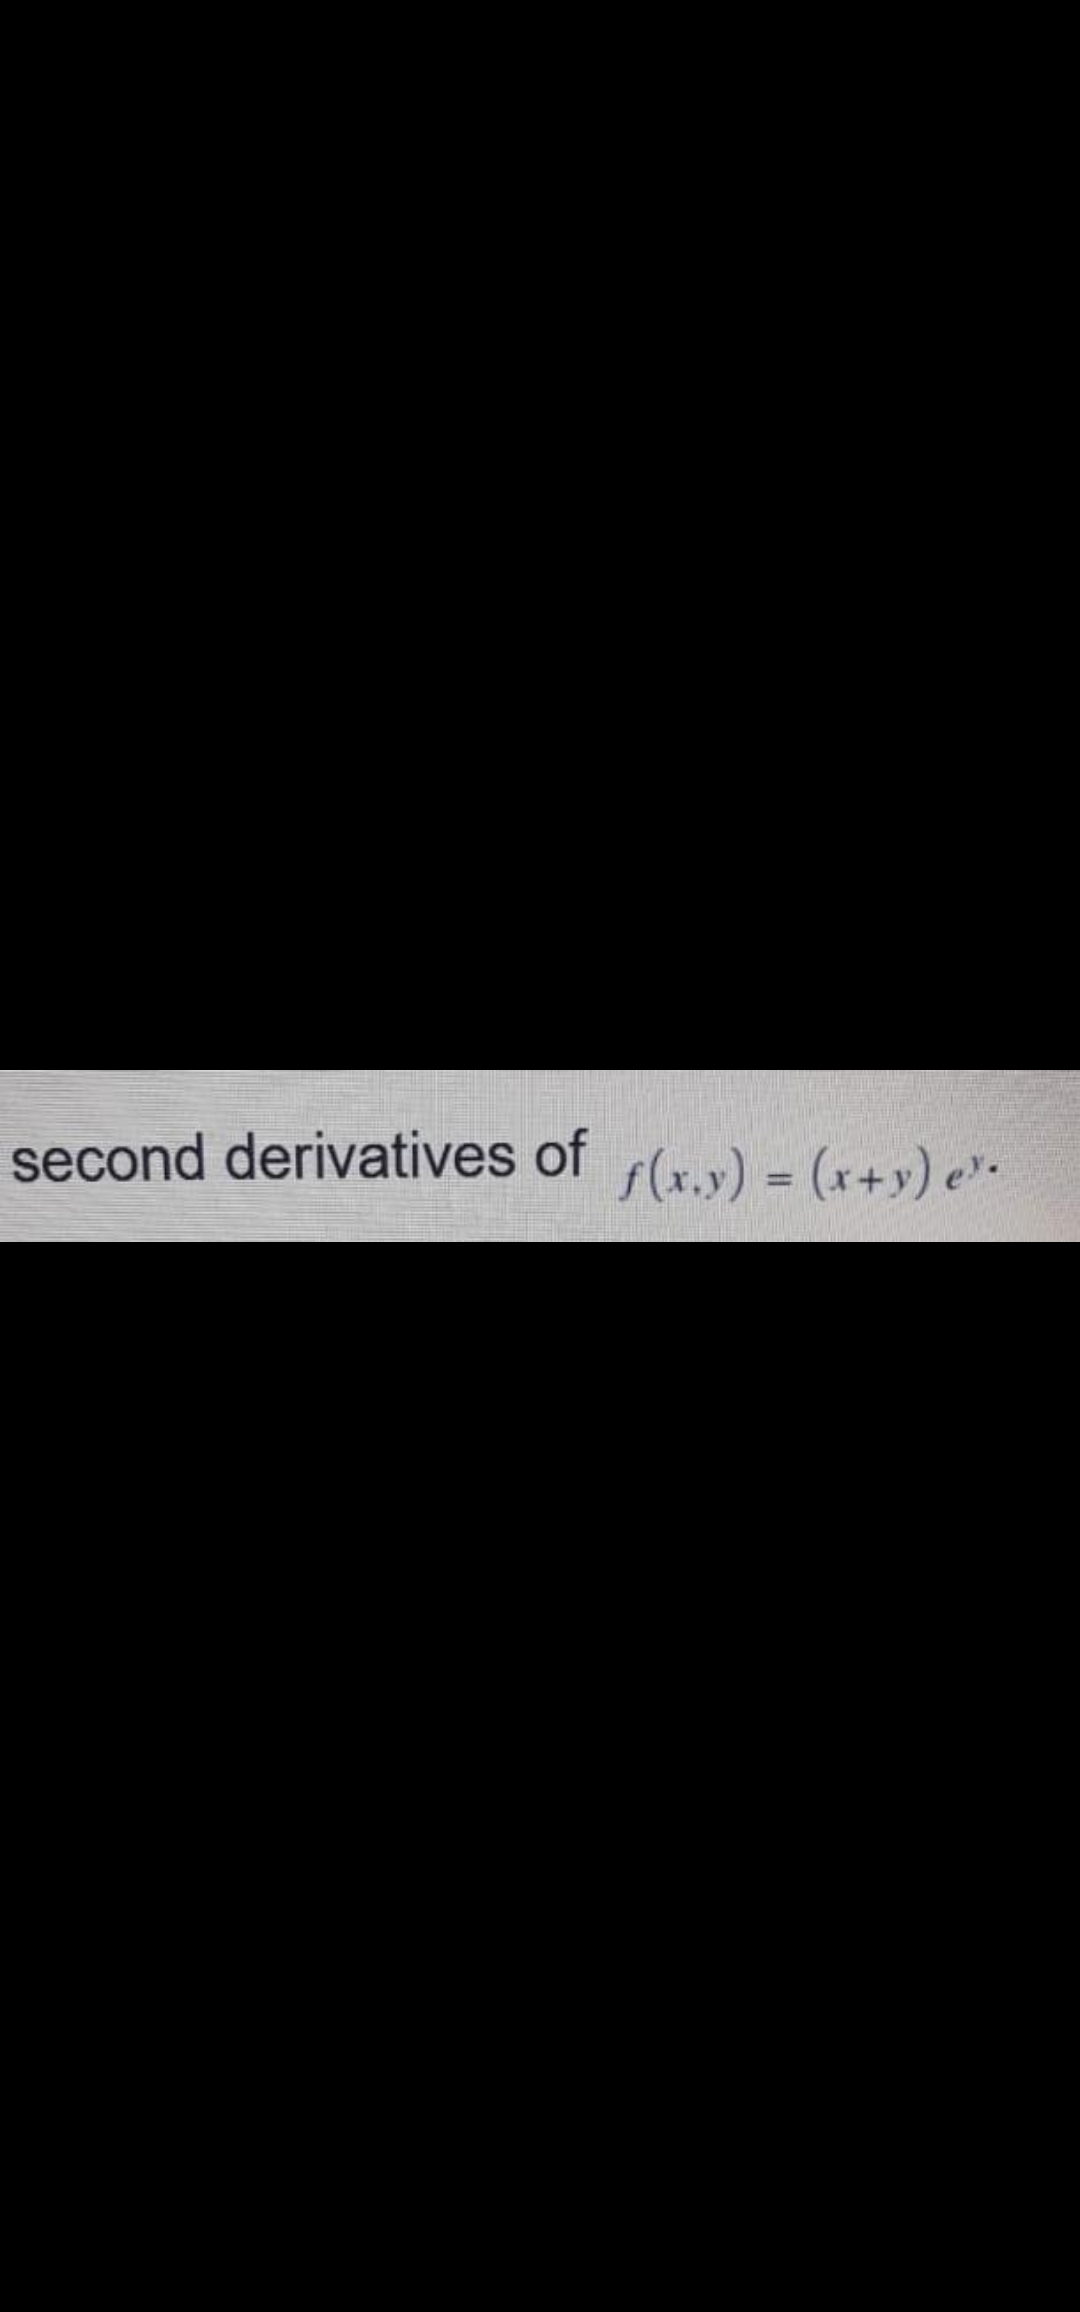 second derivatives of
s(x.y) = (x+y) e'.
%3D
